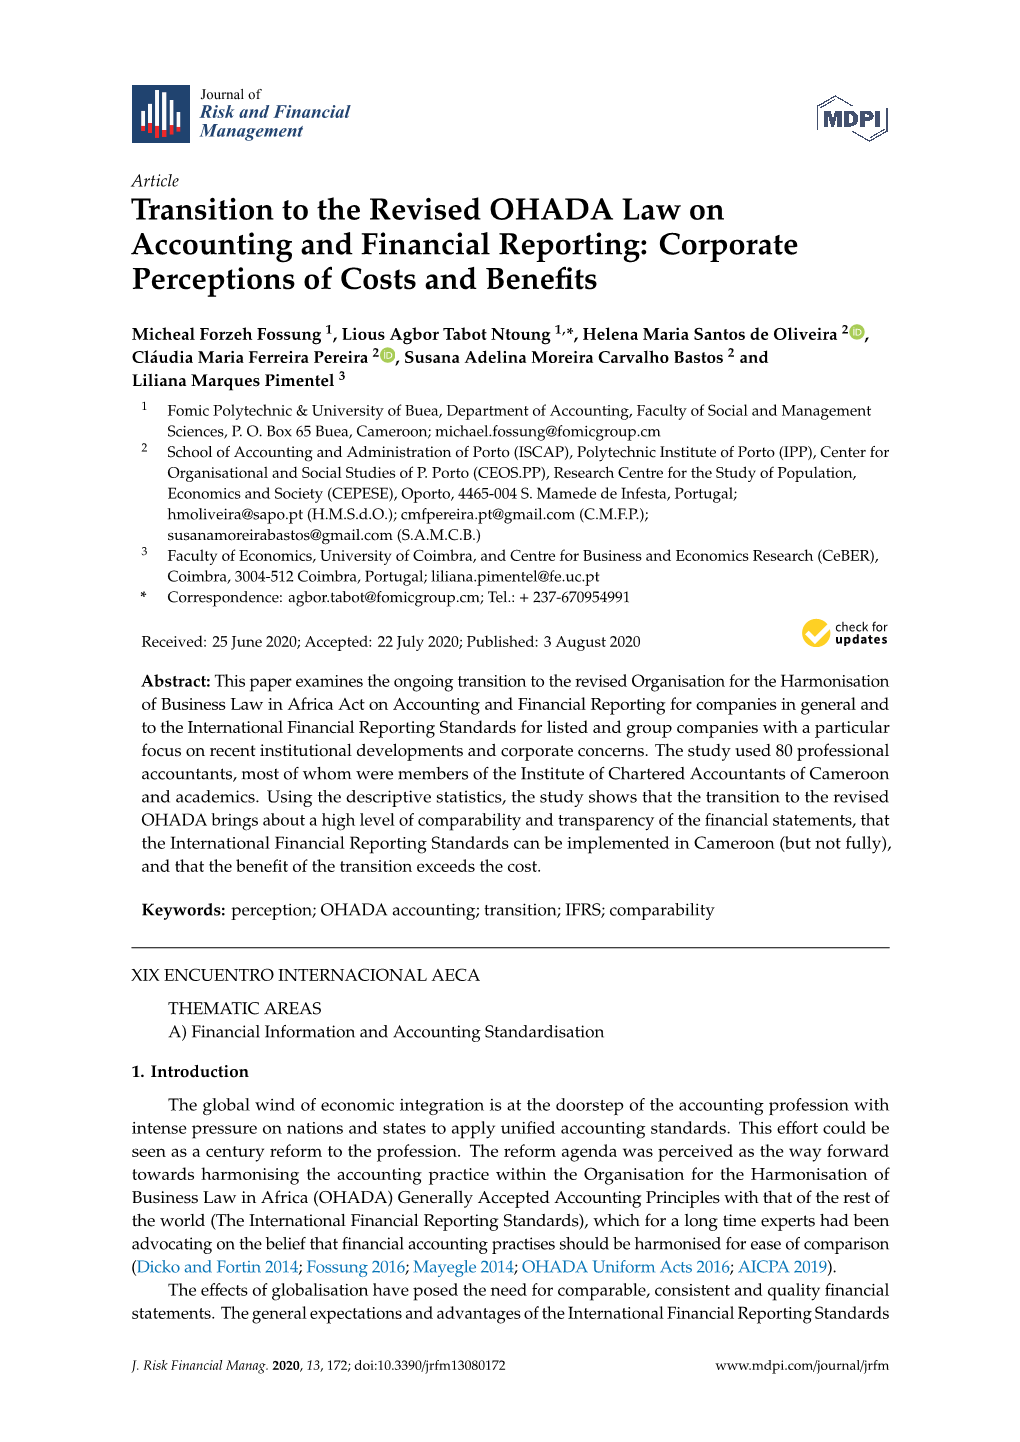 Transition to the Revised OHADA Law on Accounting and Financial Reporting: Corporate Perceptions of Costs and Beneﬁts